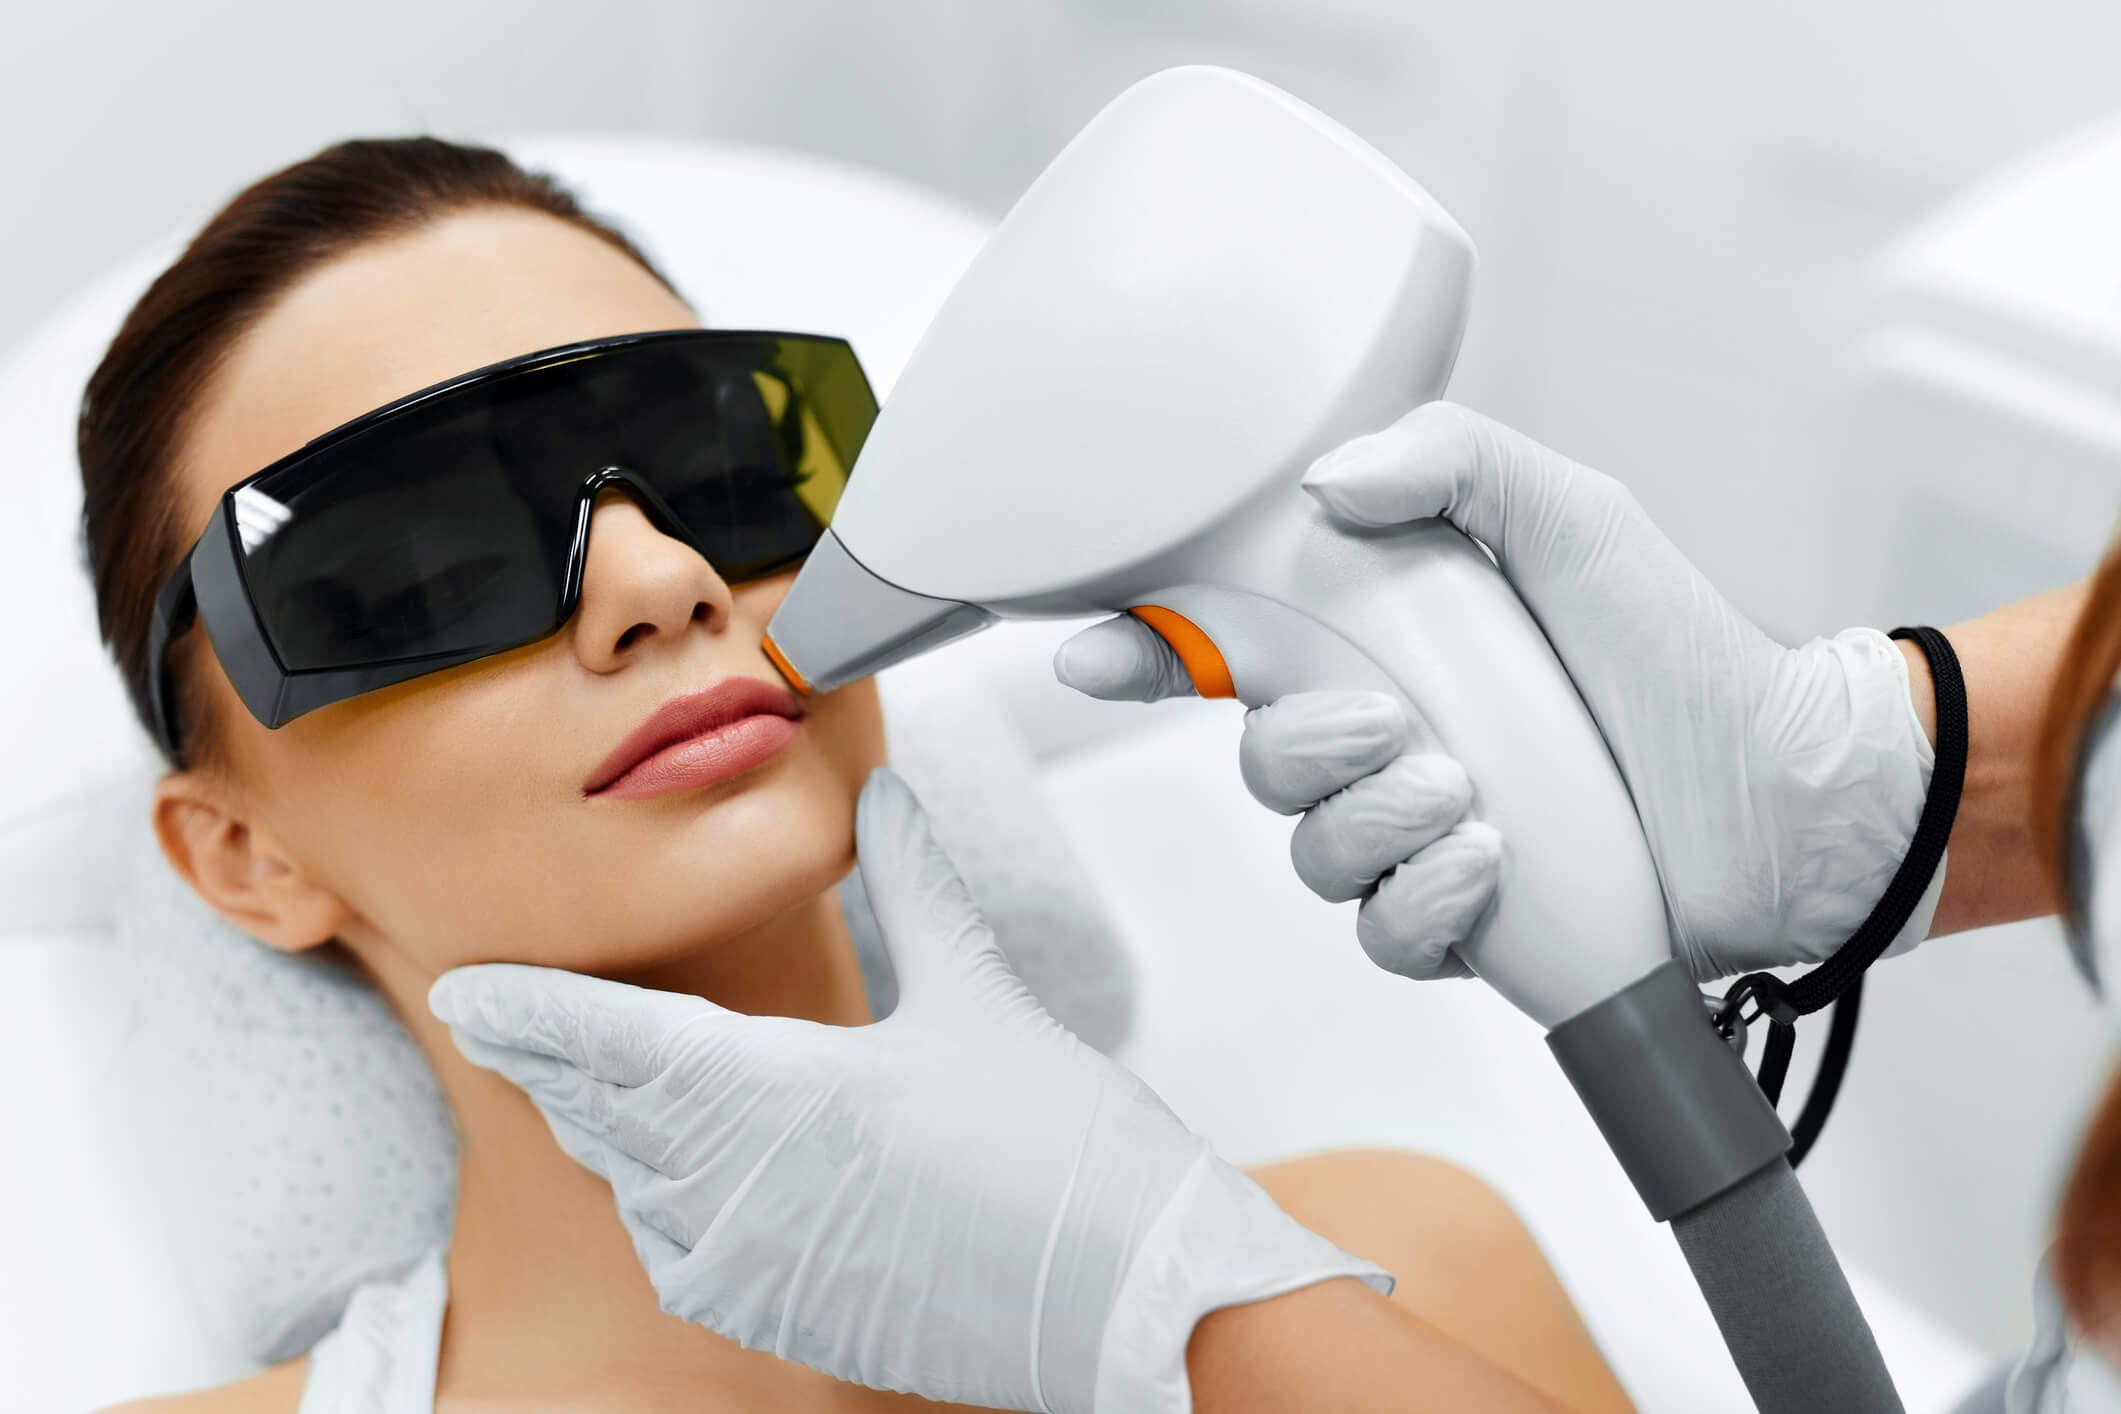 What Is Considered Small Area For Laser Hair Removal